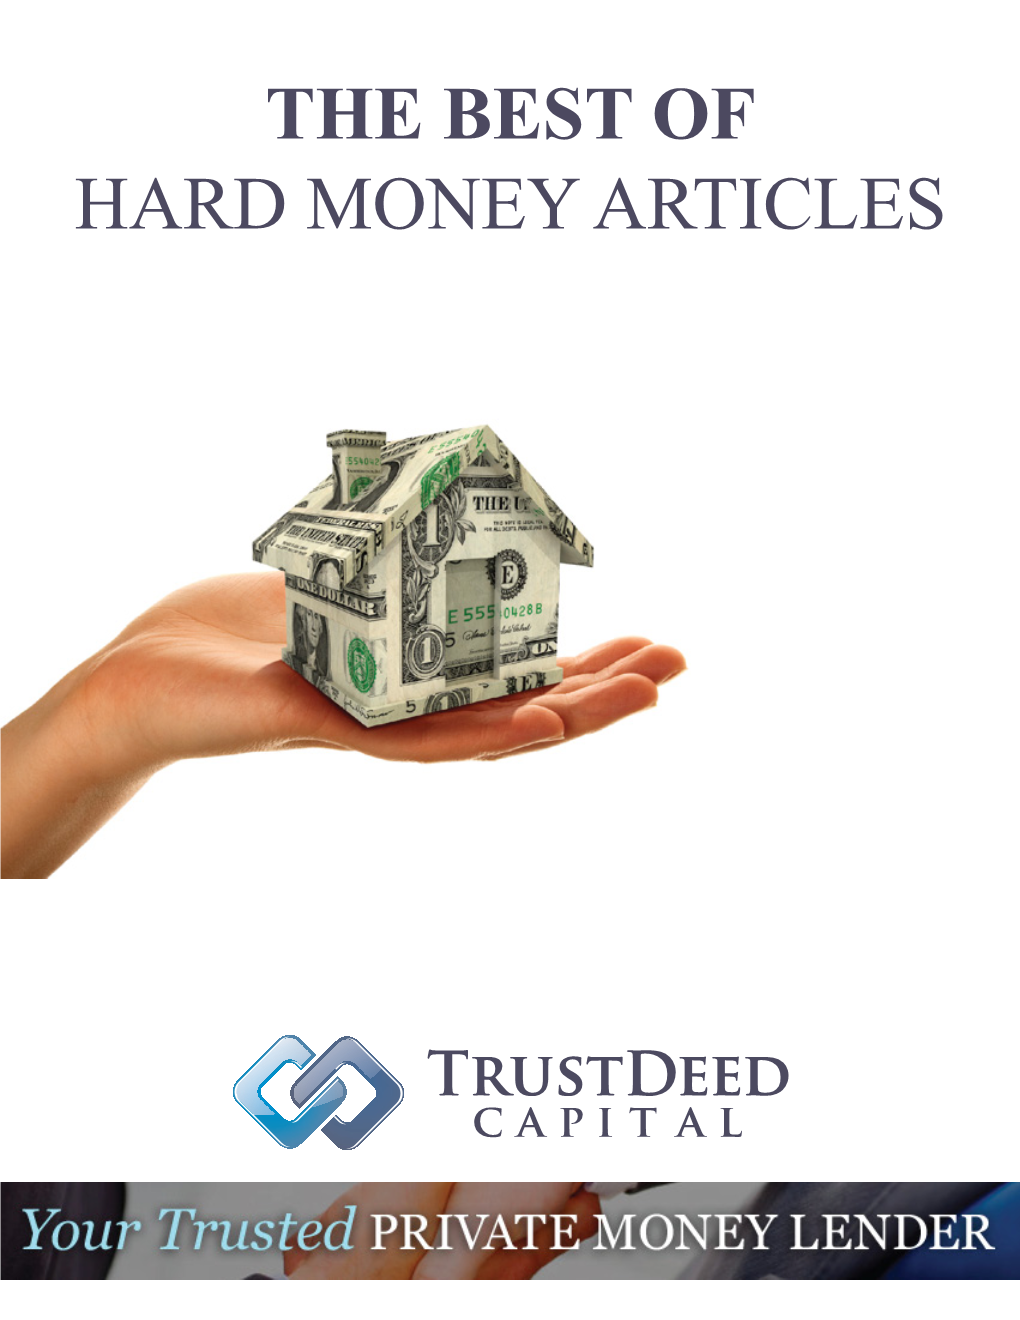 THE BEST of HARD MONEY ARTICLES Table of Contents